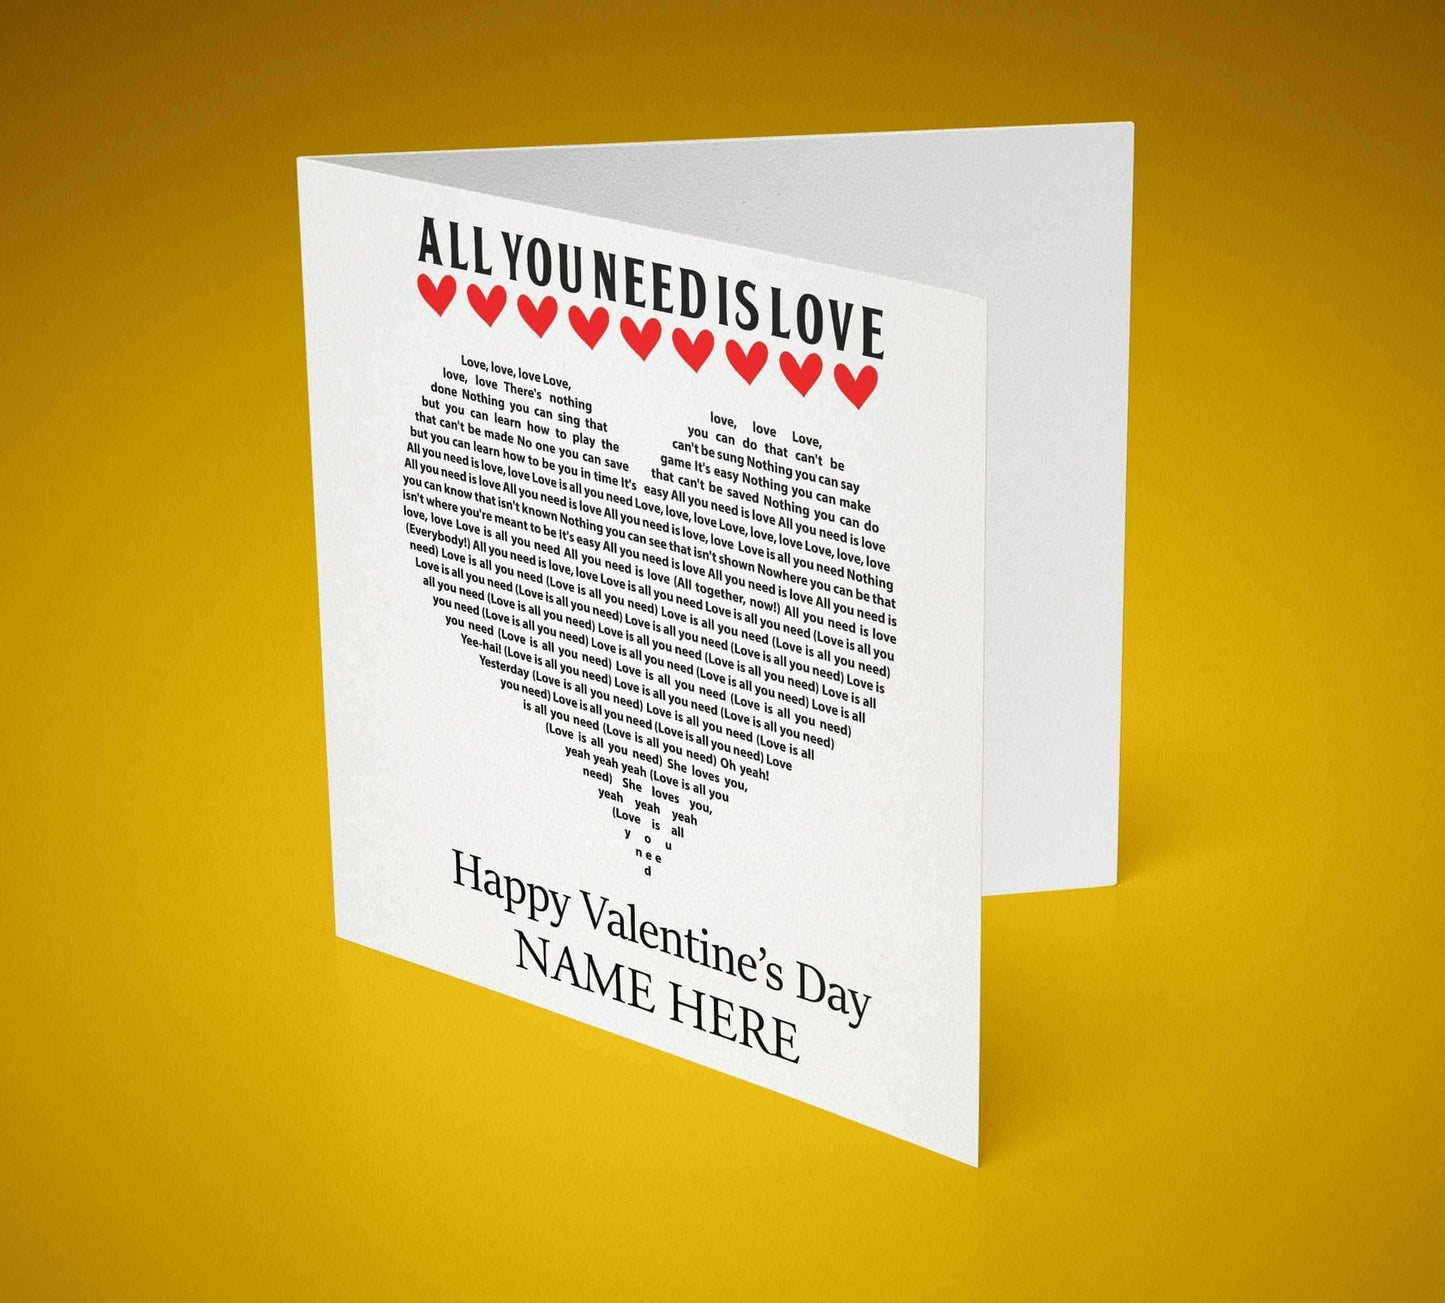 All You Need Is Love Beatles Lyrics Greeting Card 6x6in